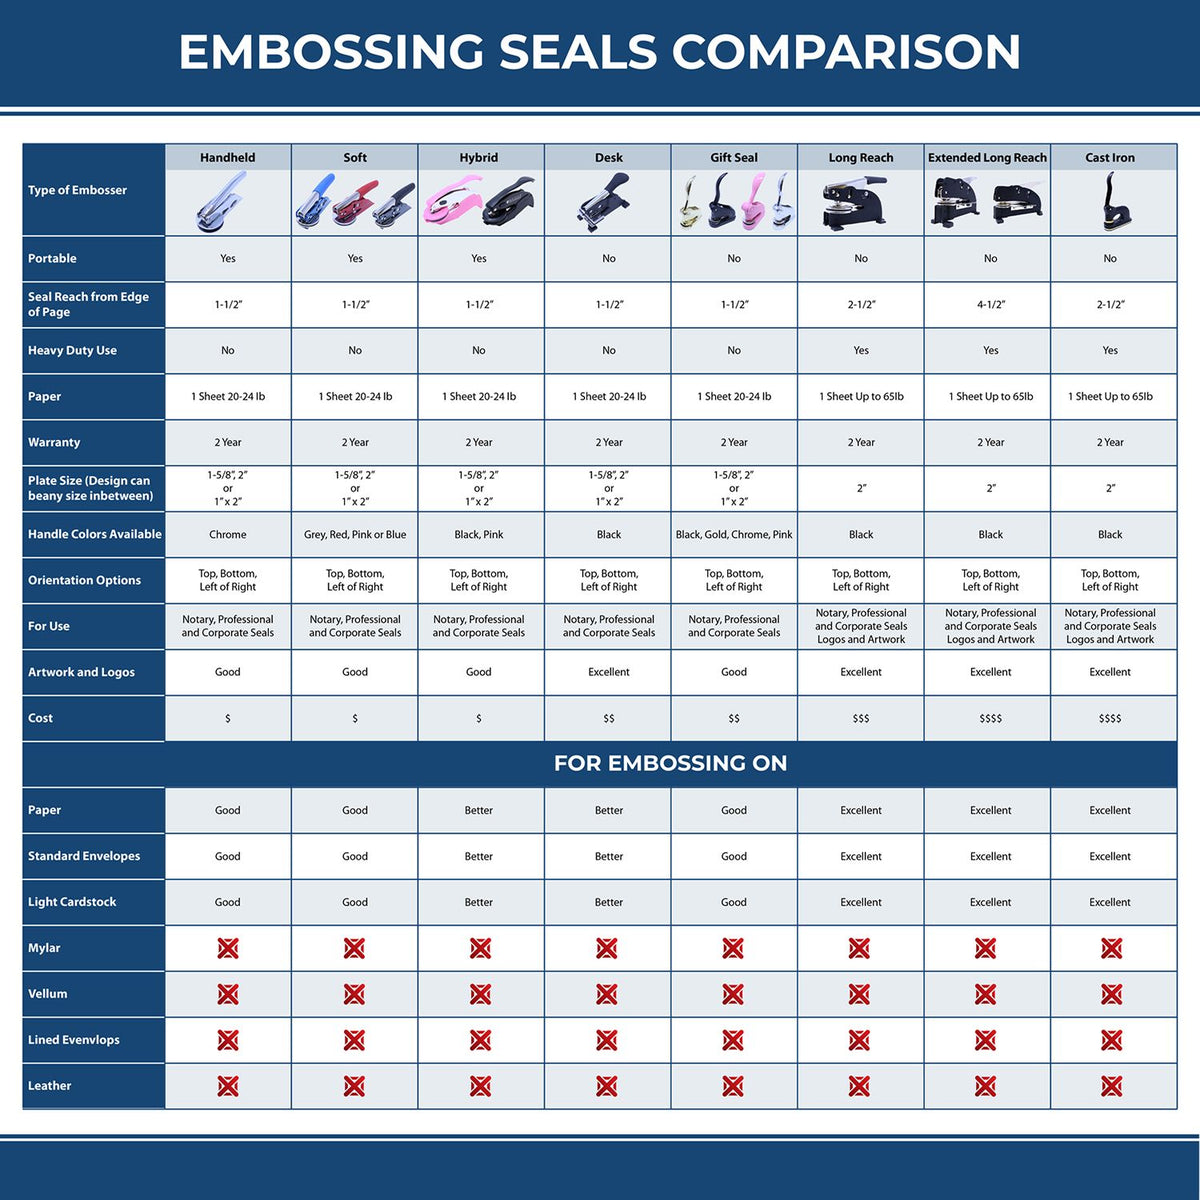 A comparison chart for the different types of mount models available for the Soft New Hampshire Professional Engineer Seal.